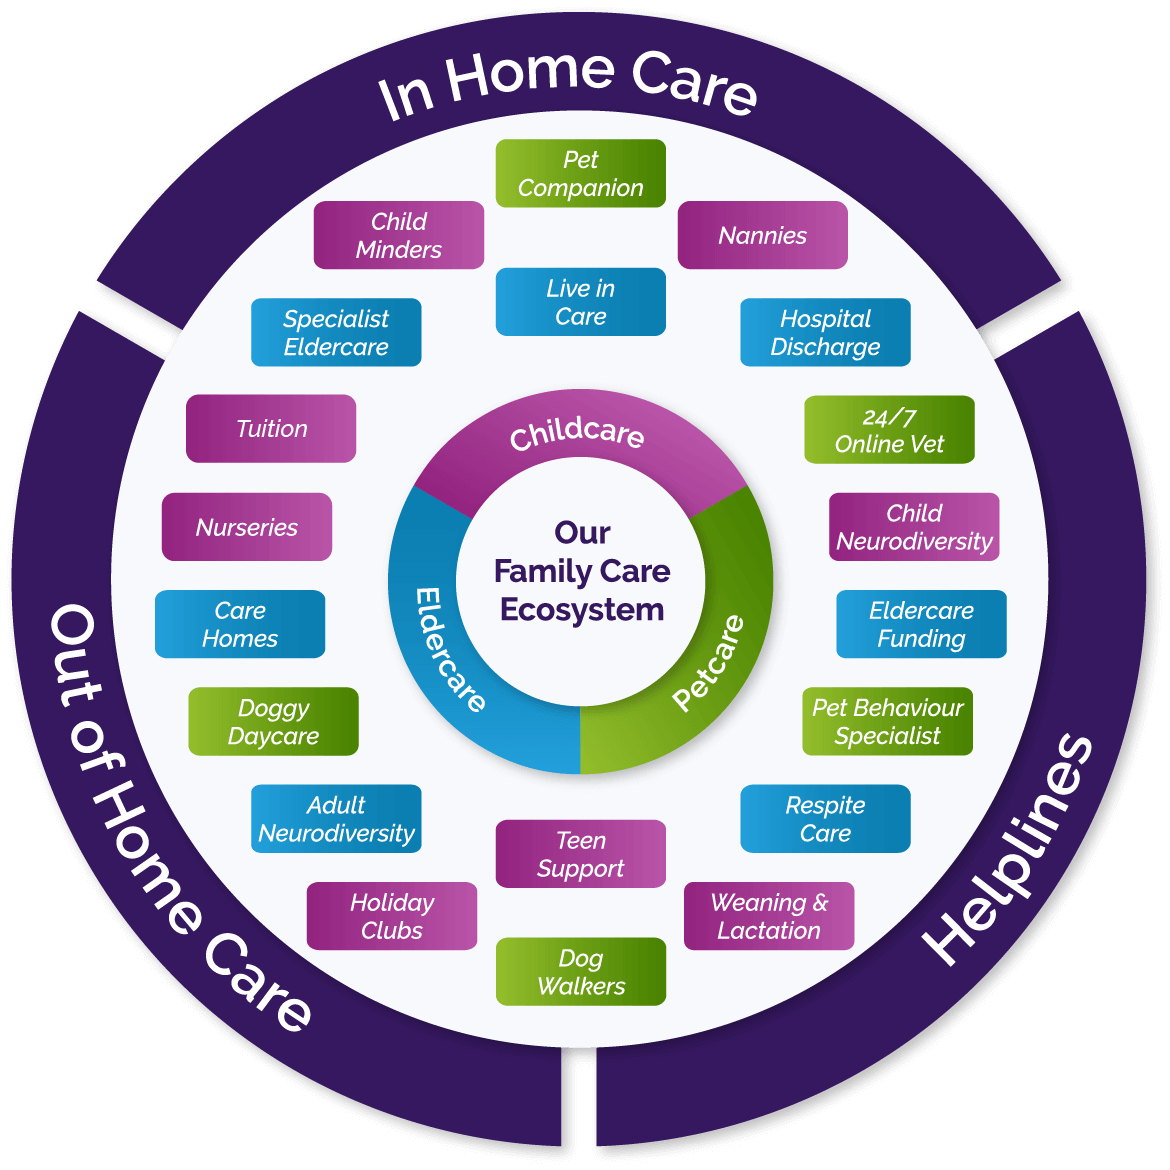 Infographic showing in-home, out-of-home and helpline support available through Family Care